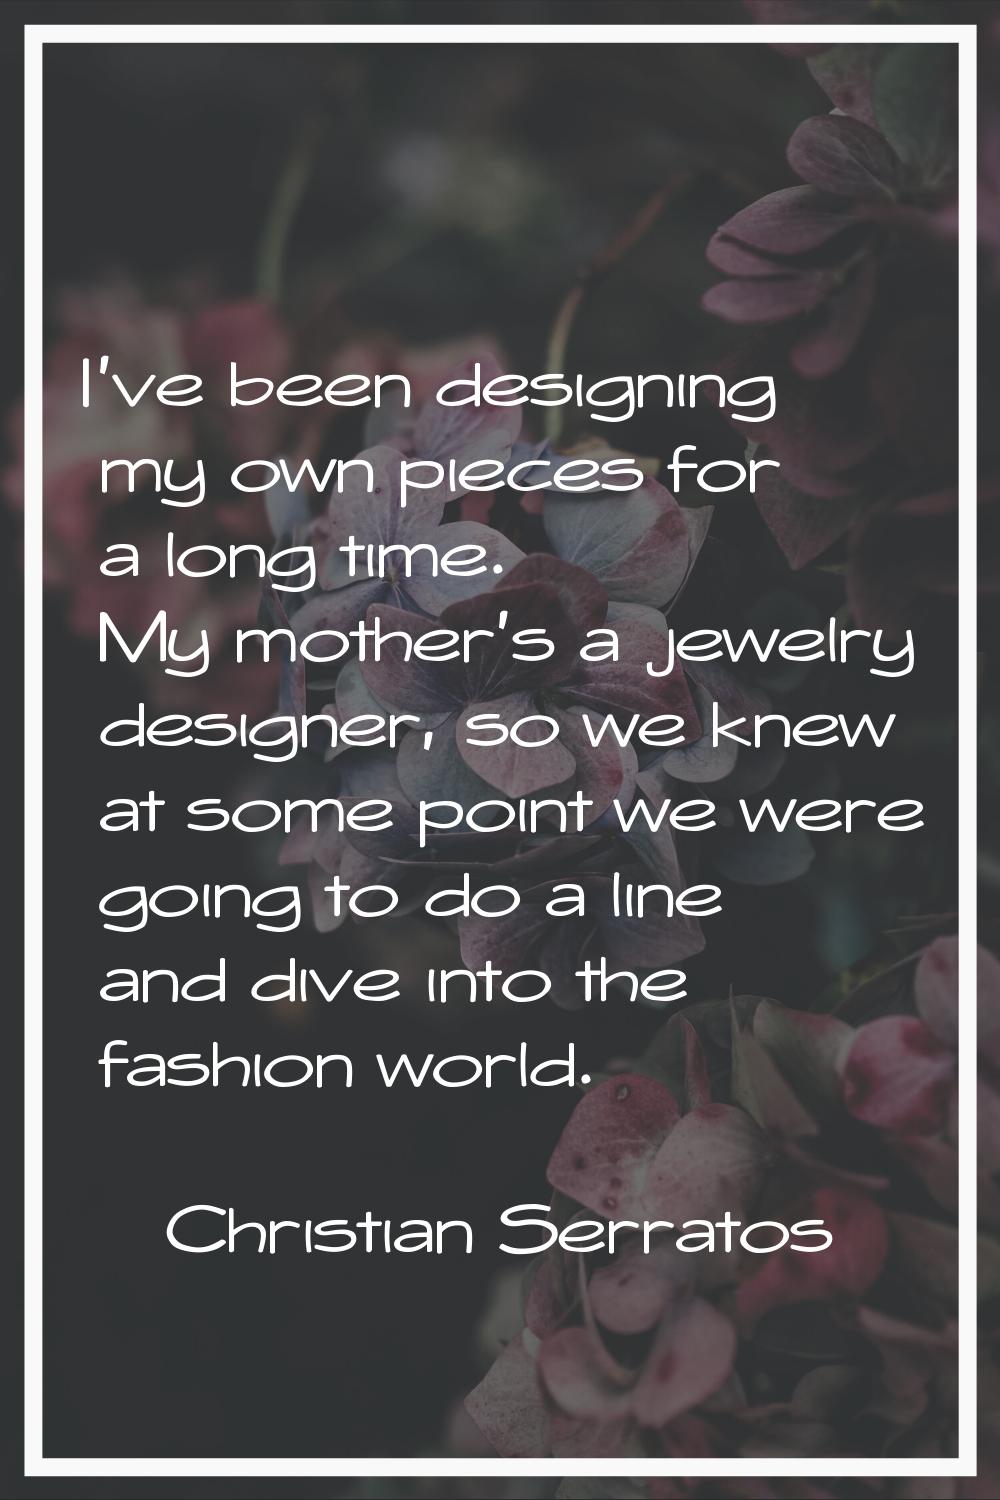 I've been designing my own pieces for a long time. My mother's a jewelry designer, so we knew at so